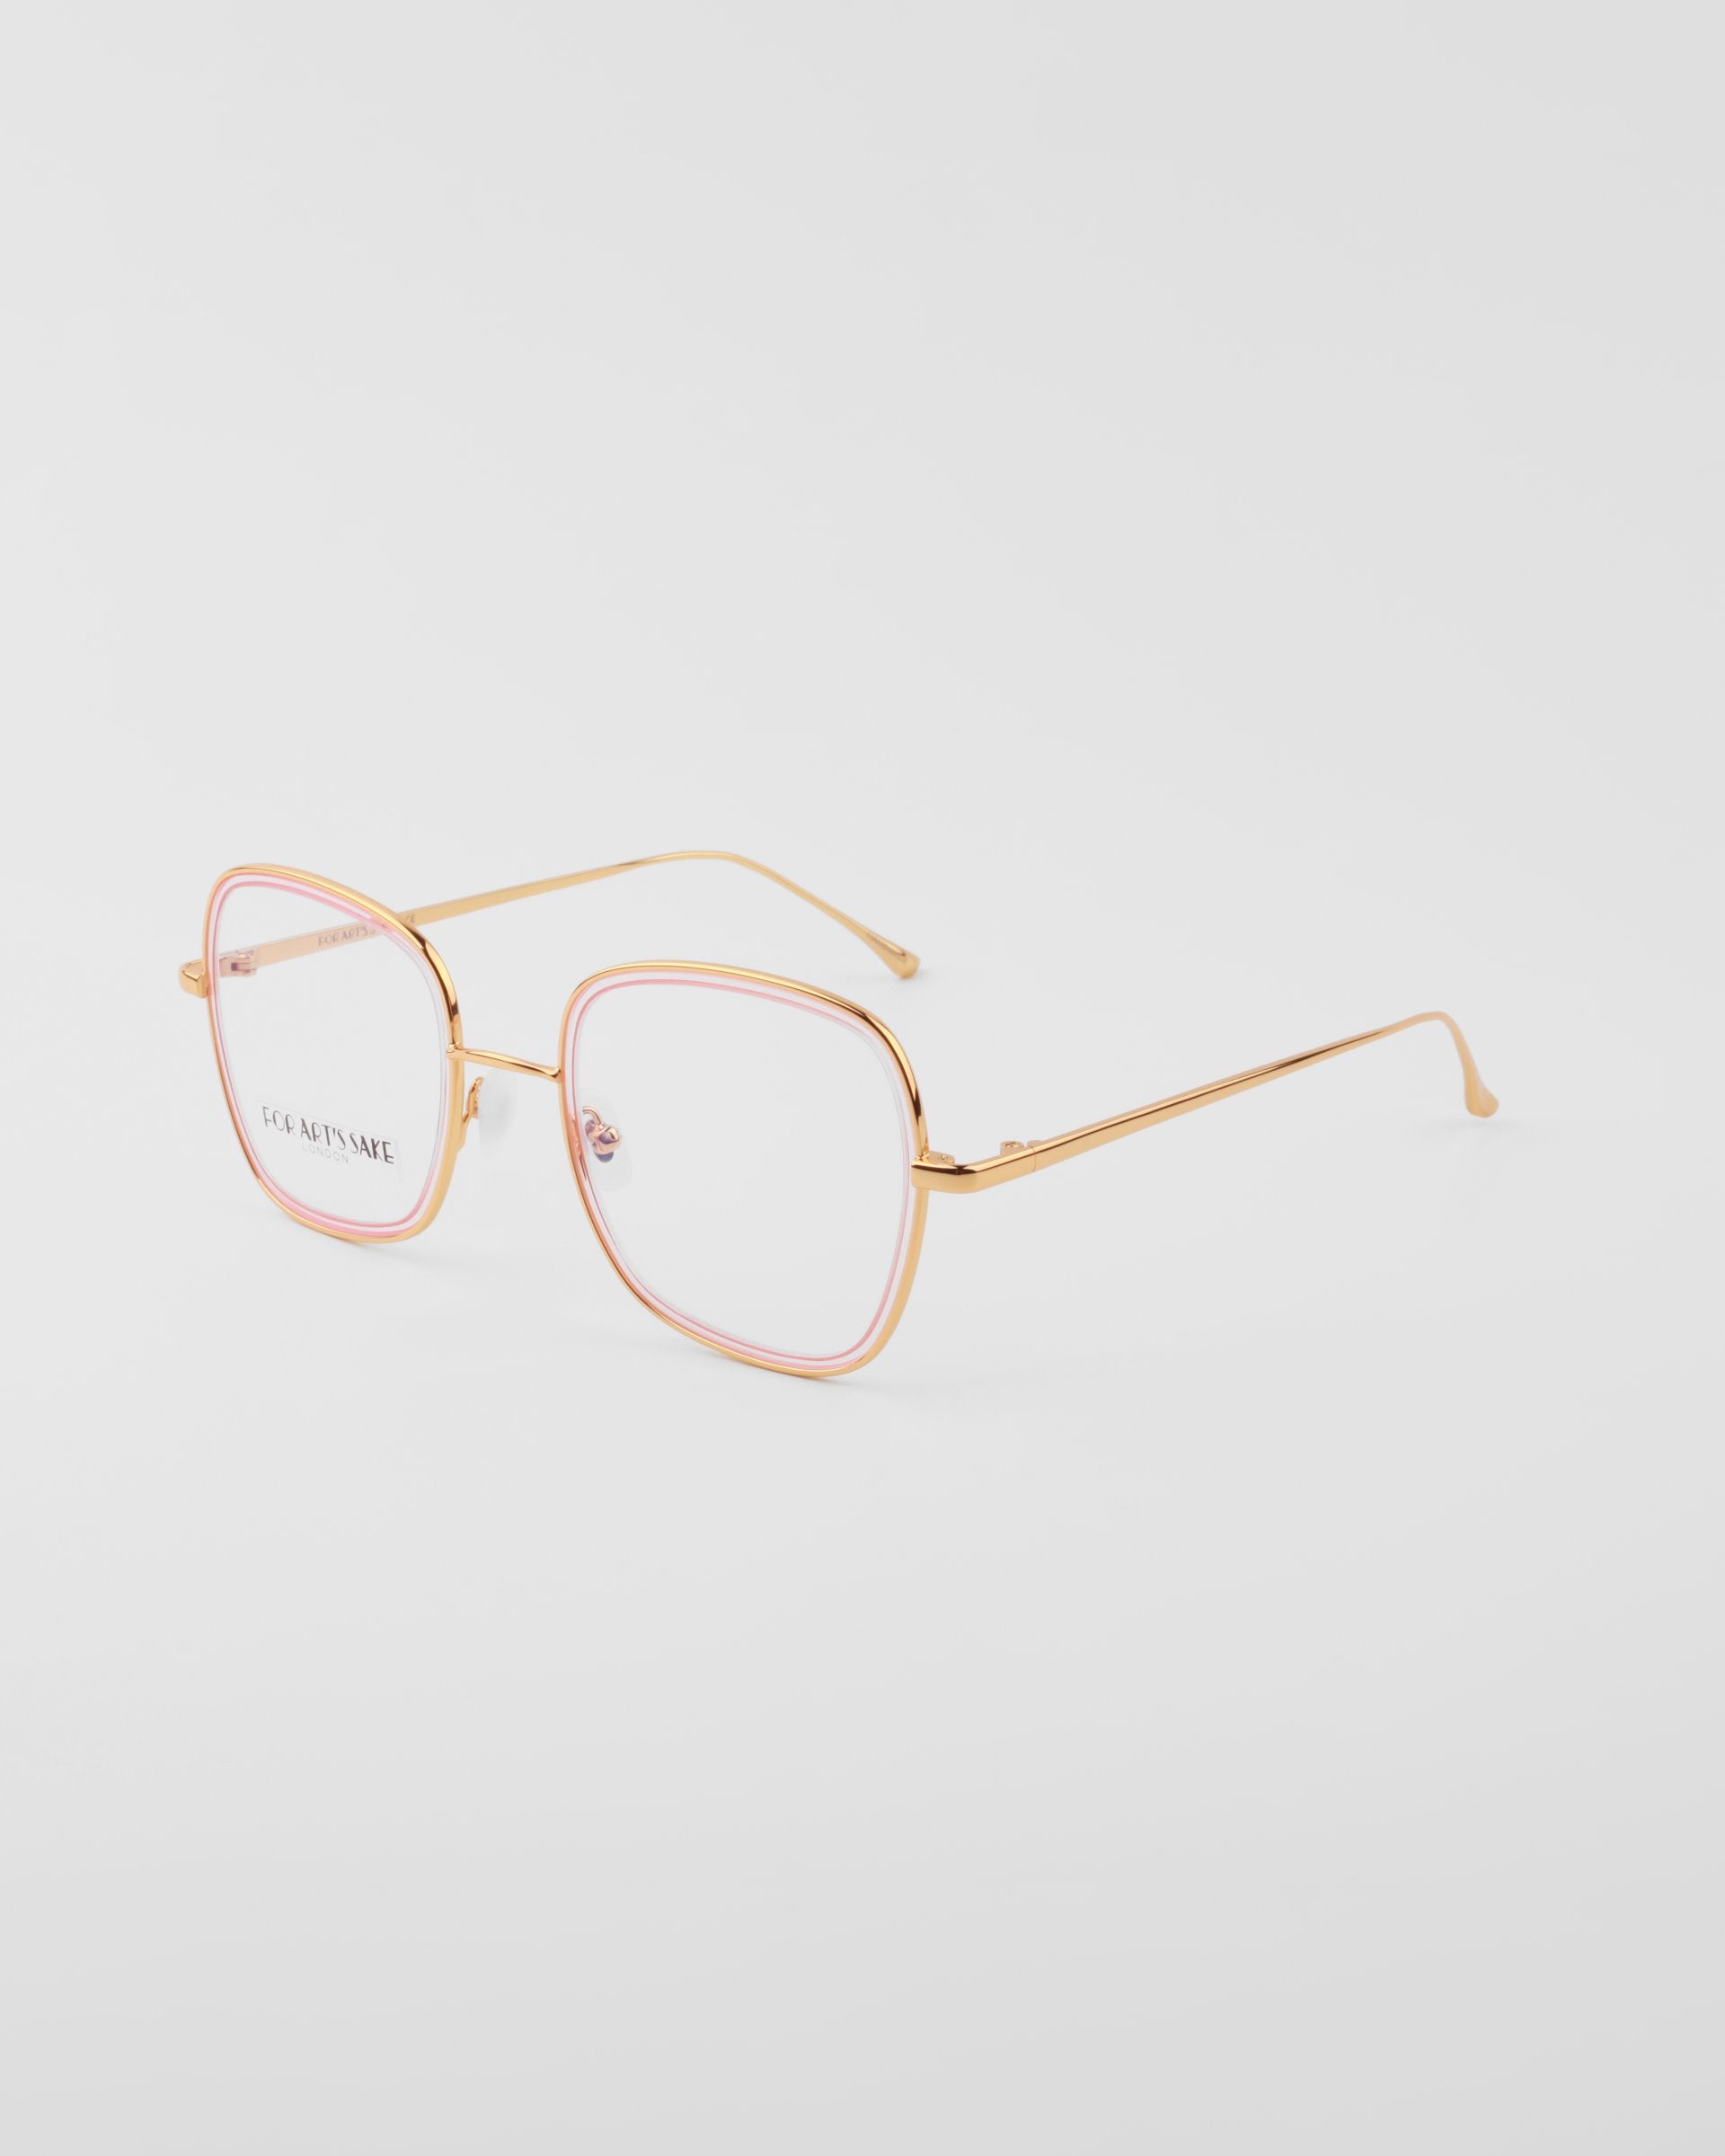 A pair of For Art&#39;s Sake® Coconut eyeglasses with thin, 18-karat gold-plated frames and pink square rims around the clear lenses, photographed on a white background. The nose pads are adjustable for comfort. The slender arms are straight with a slight curve at the ends.